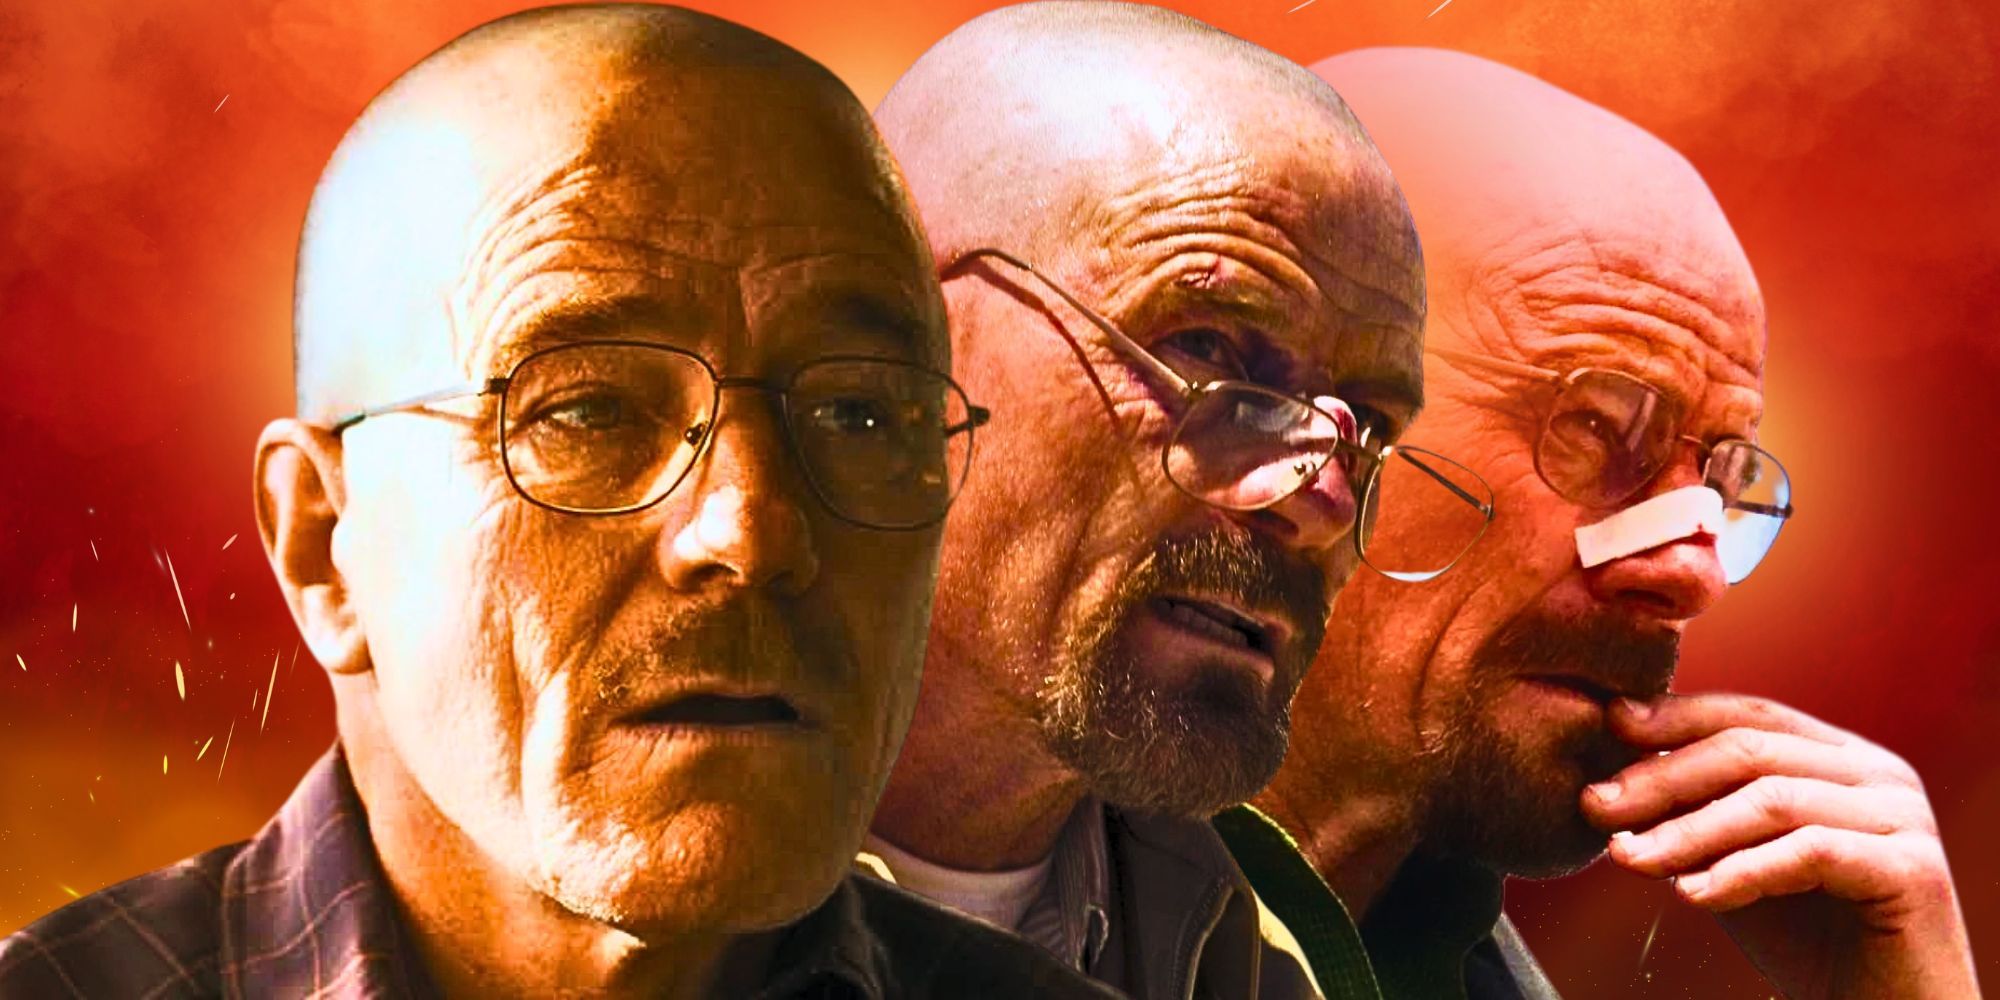 Bryan Cranston as Walter White in El Camino, Breaking Bad, and Better Call Saul